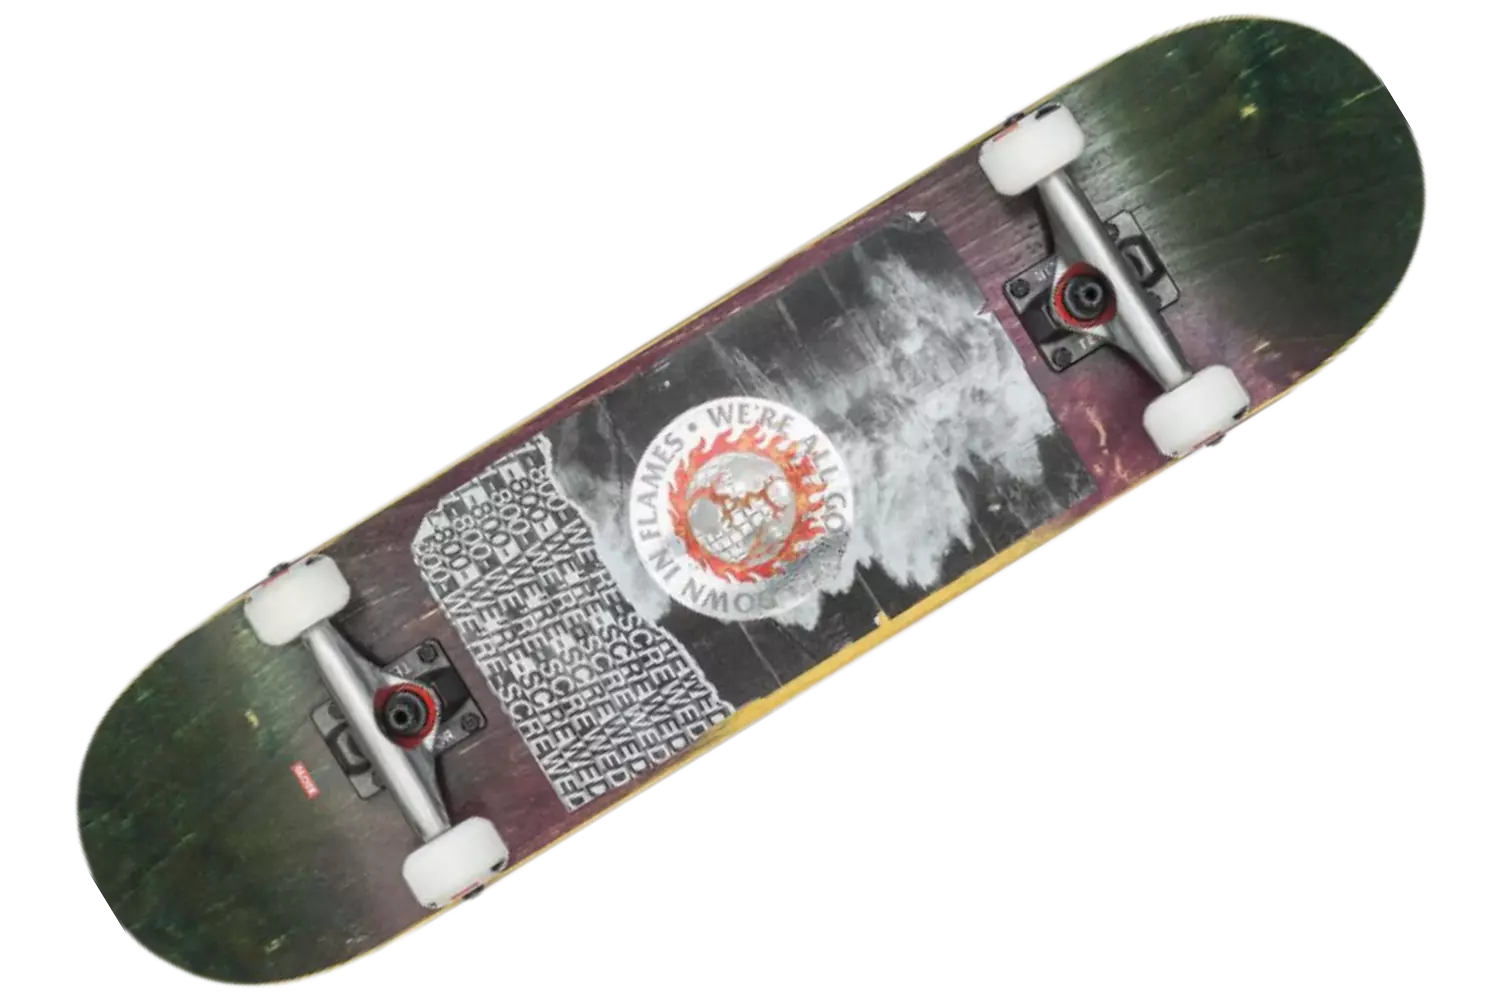 globe in flames skateboard comes with different deck design in the backdrop of a black and purple wooden background